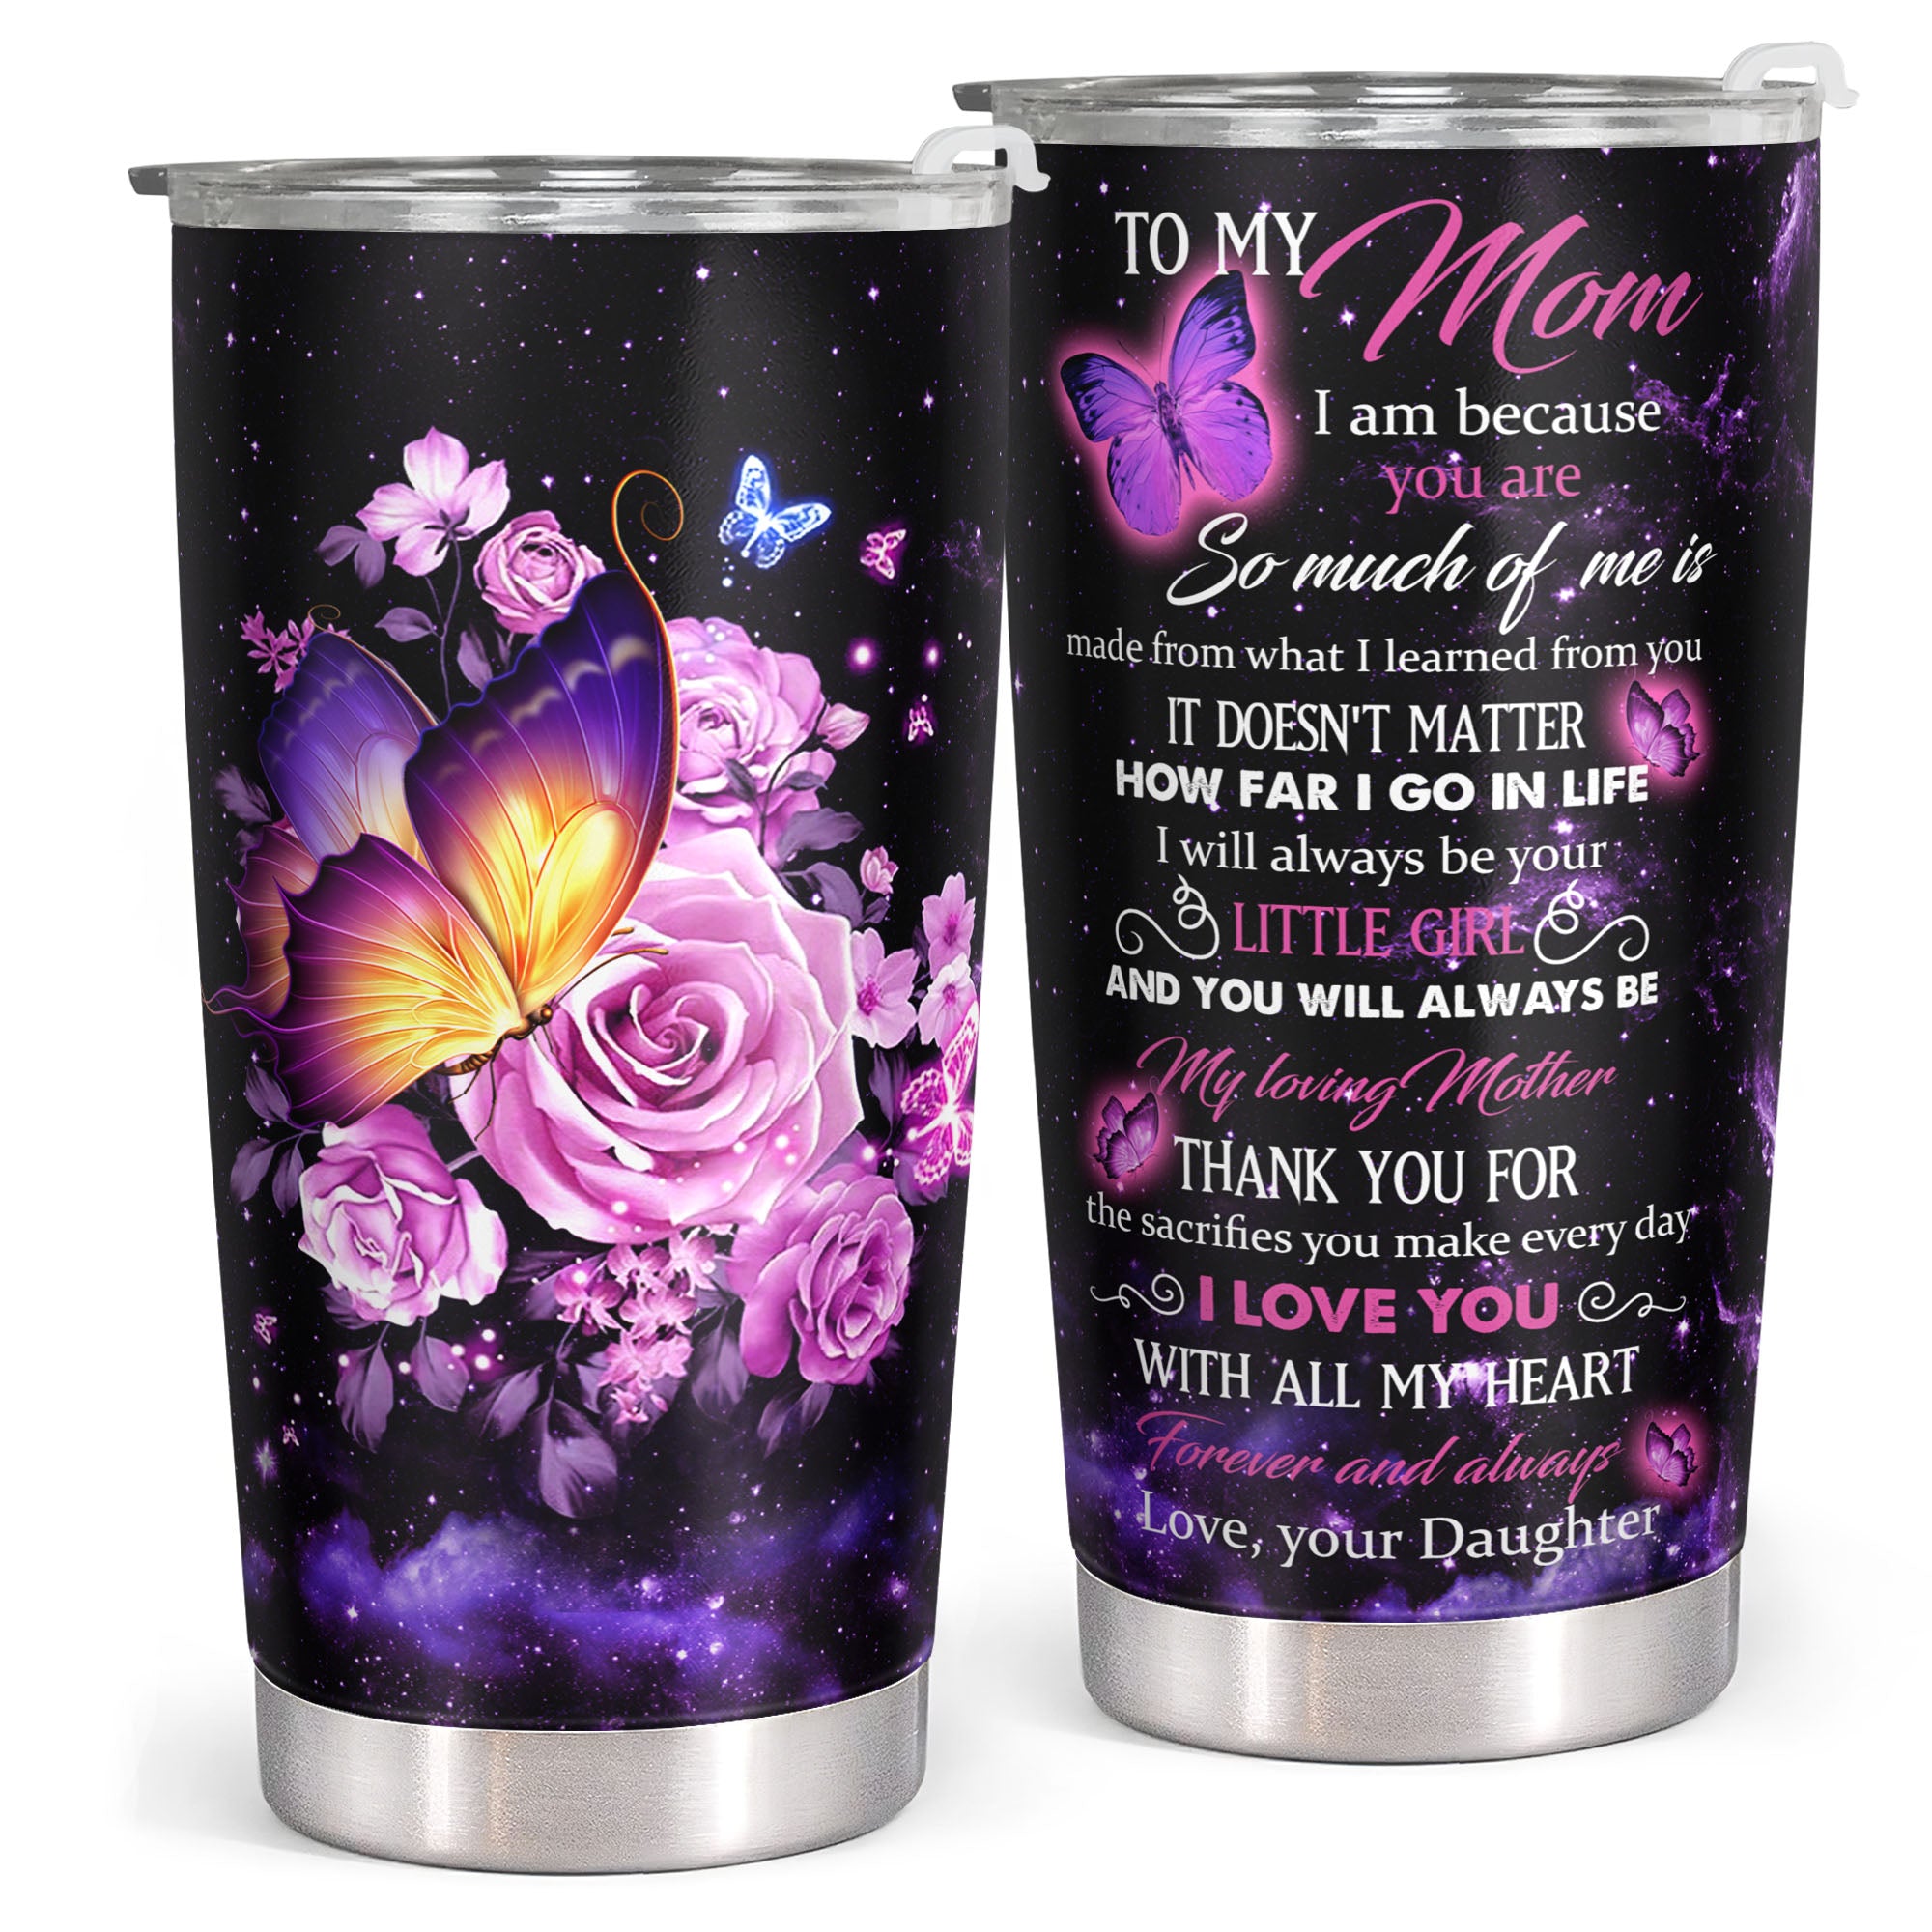 Gifts for Boy Mom from Son, 20oz Insulated Tumbler Mom Gifts Ideas, Mom  Birthday Gifts, Christmas Mo…See more Gifts for Boy Mom from Son, 20oz